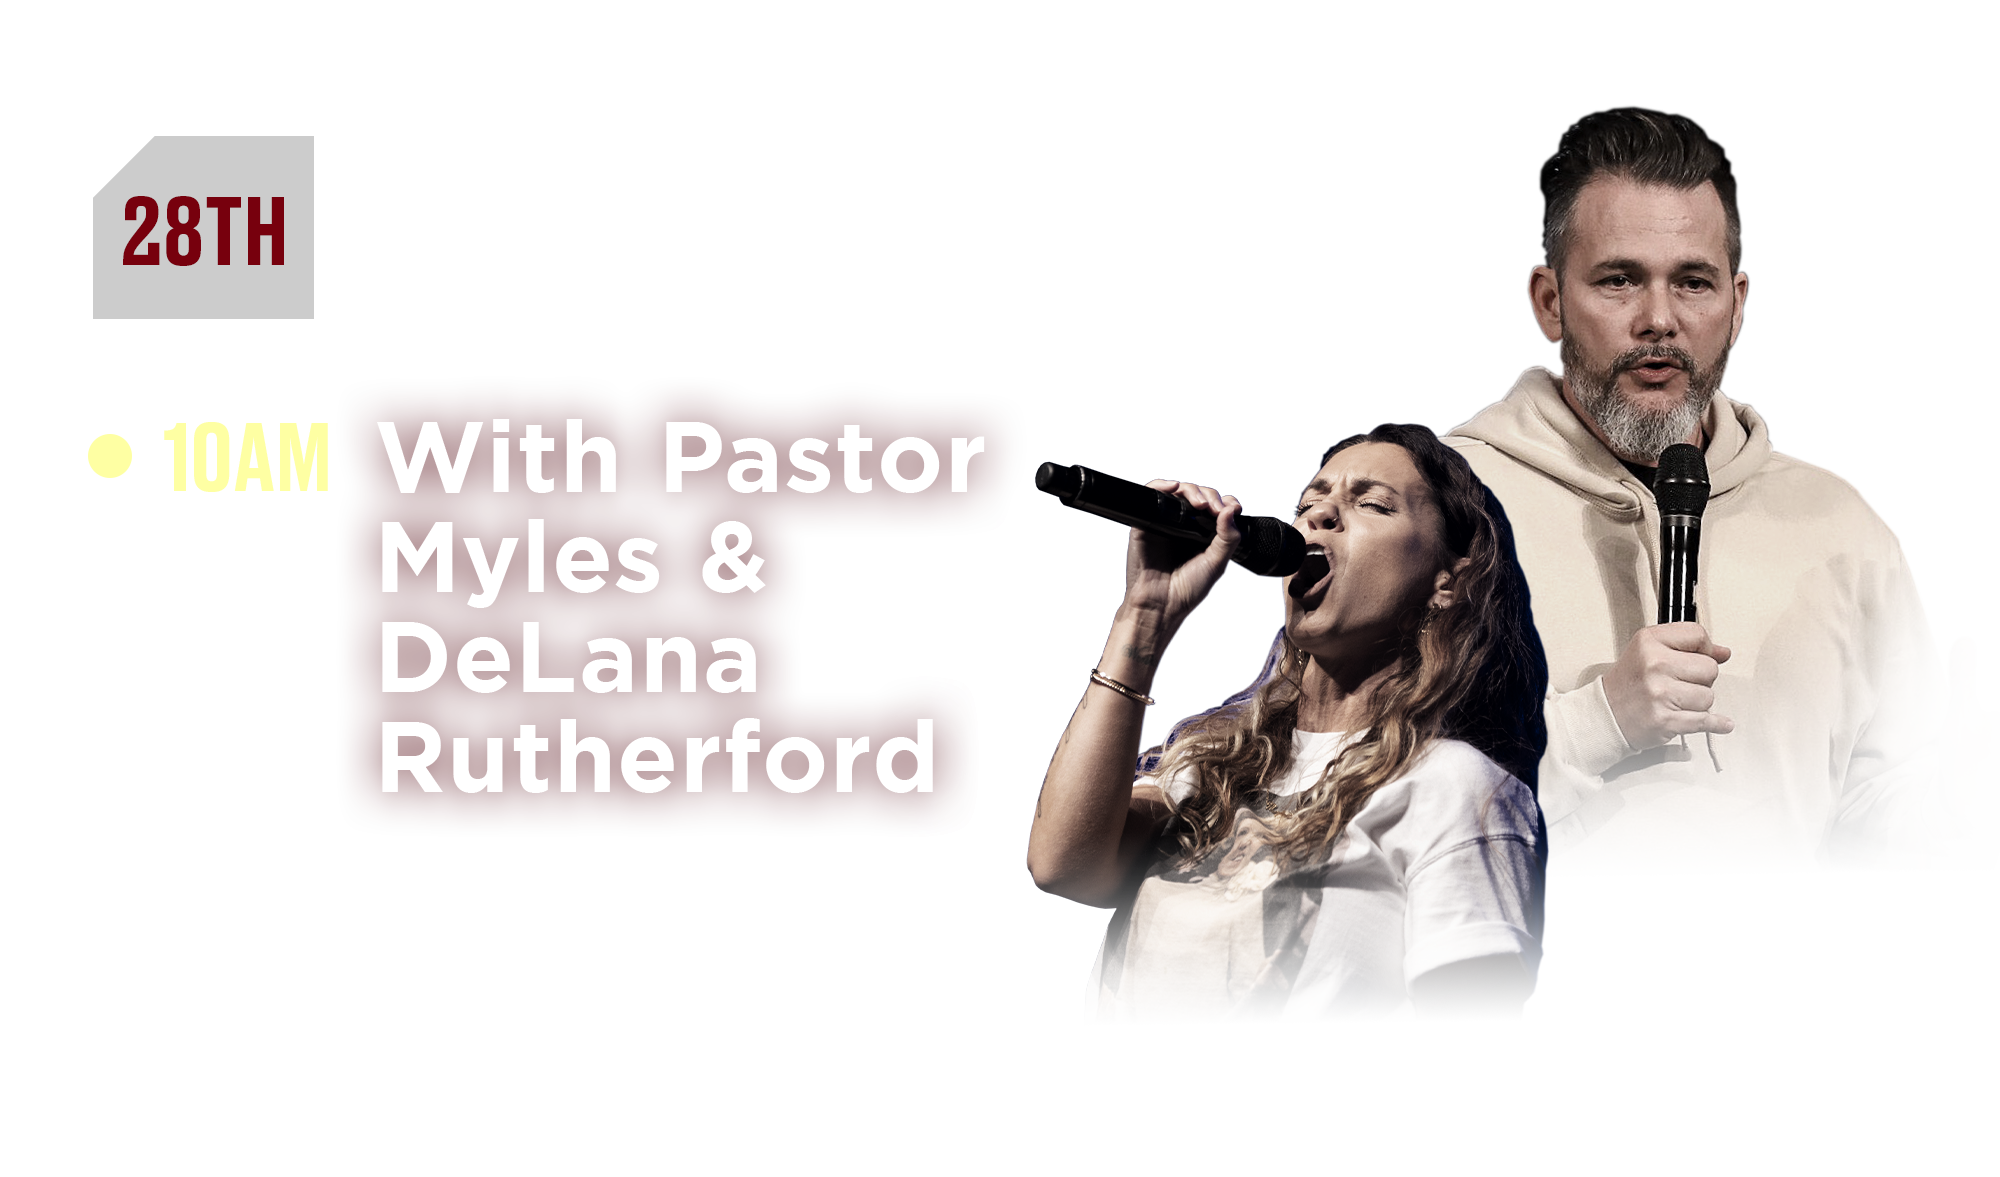 28th Outpouring Thursdays 10AM with Pastor Myles and DeLana Rutherford